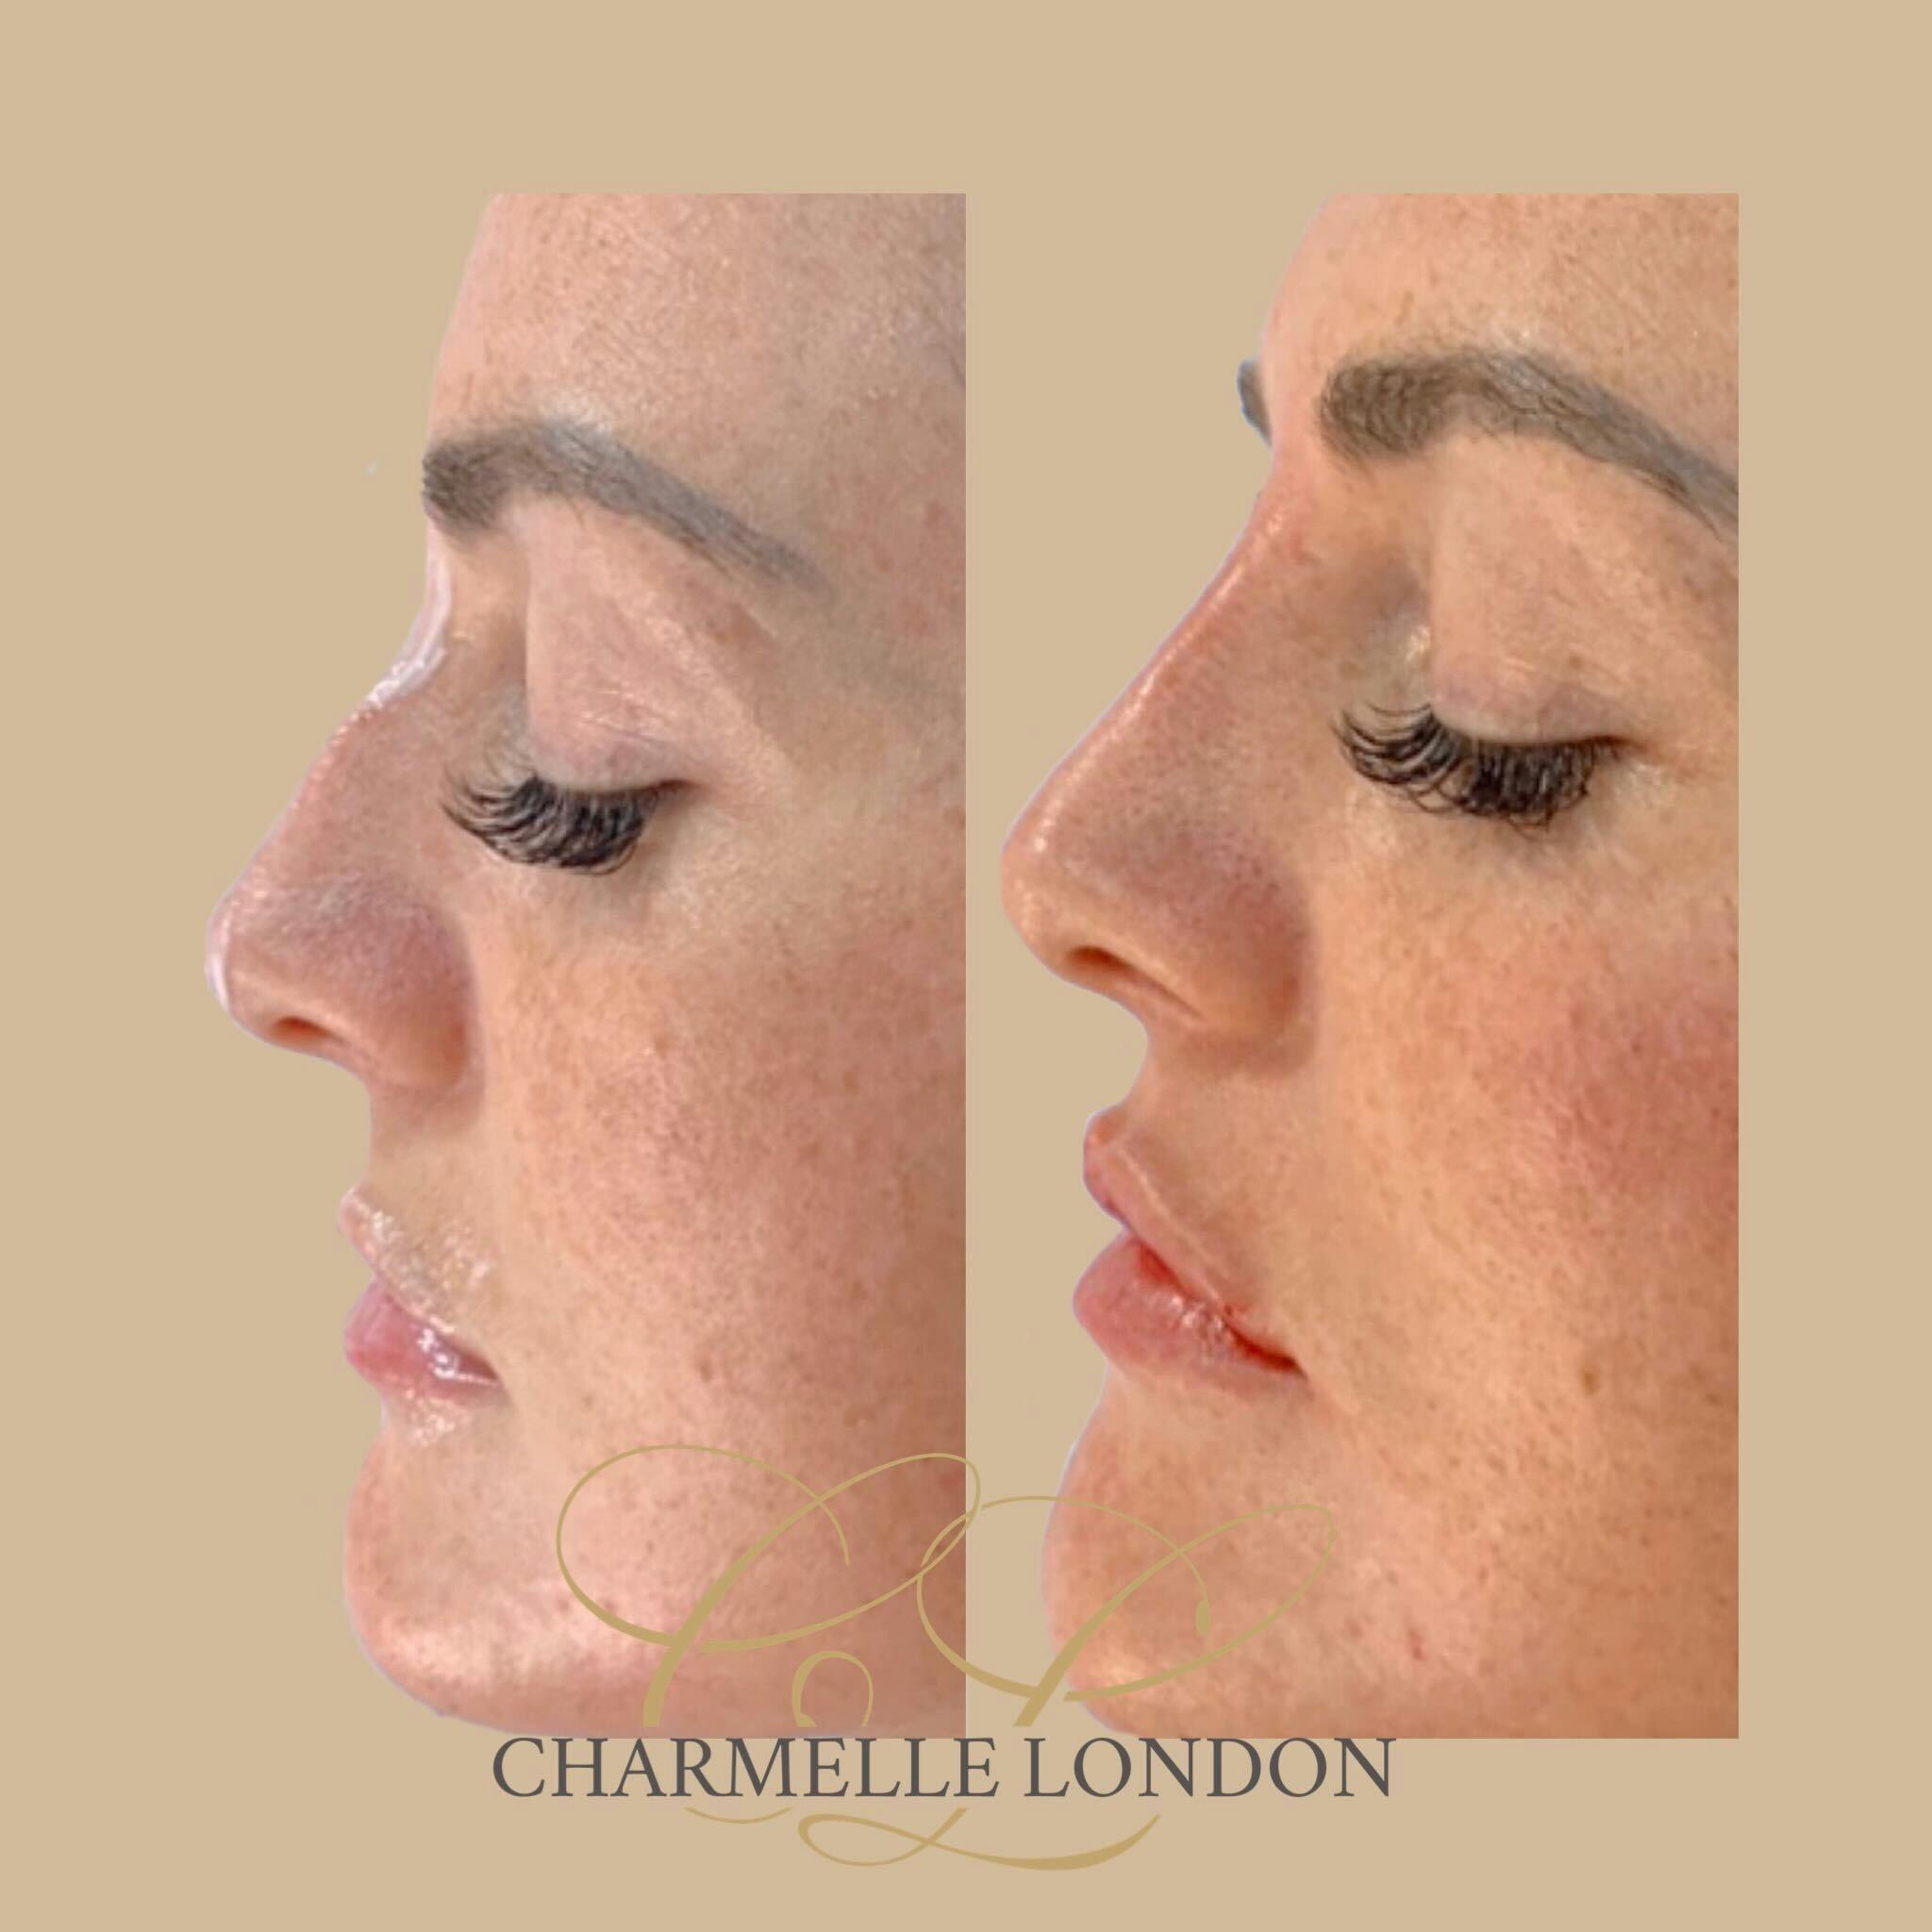 Quick and simple with instant results for people who want the change the shape of their nose without surgery.